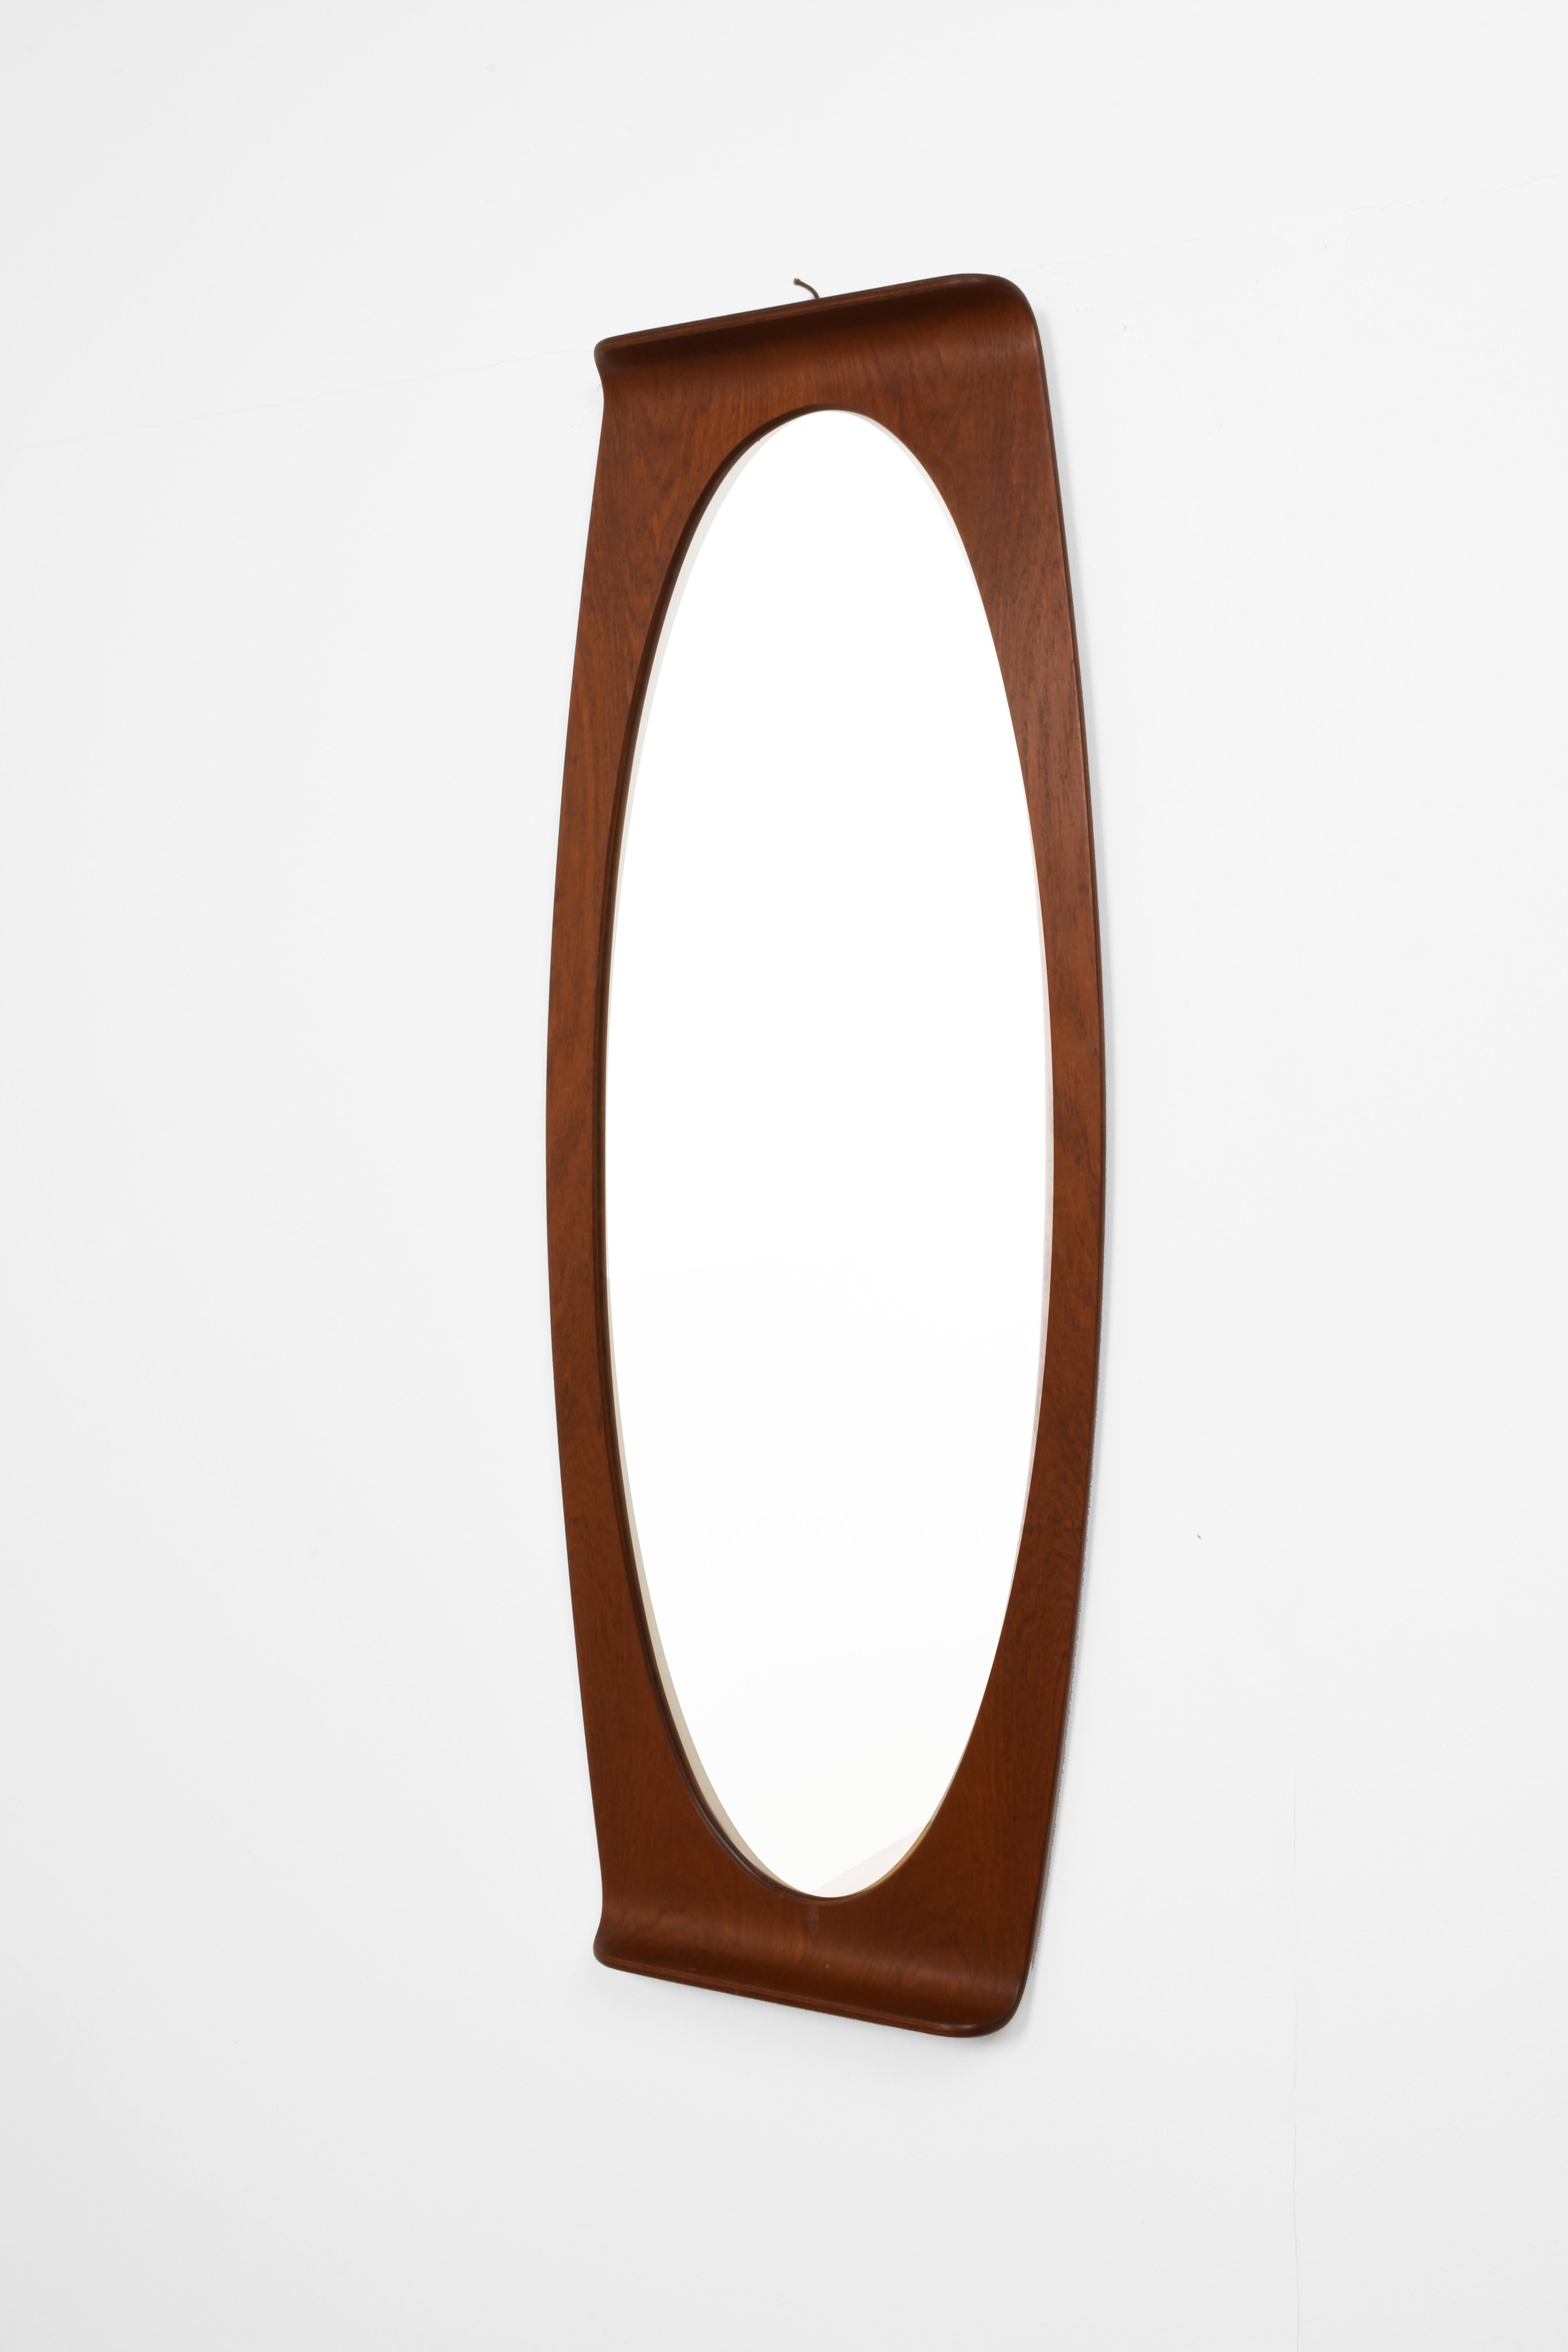 Amazing mid-century curved wood elliptical wall mirror. This fantastic piece was designed by Franco Campo and Carlo Graffi in Italy during the 1960s.

This great item is wonderful because of its lines, with the elliptic mirror and the smooth long